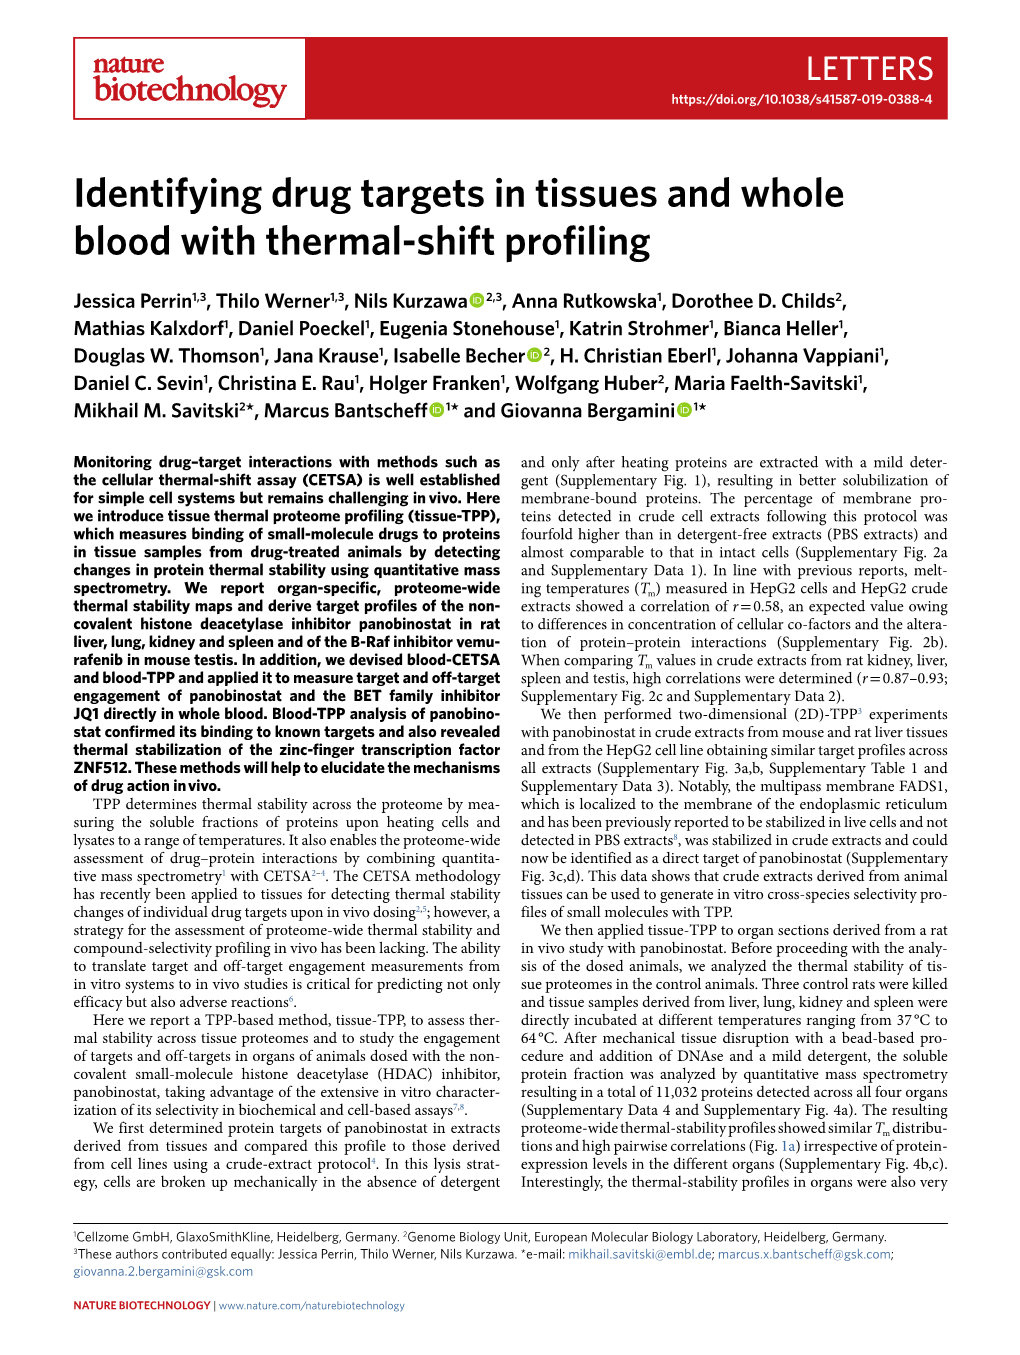 Identifying Drug Targets in Tissues and Whole Blood with Thermal-Shift Profiling